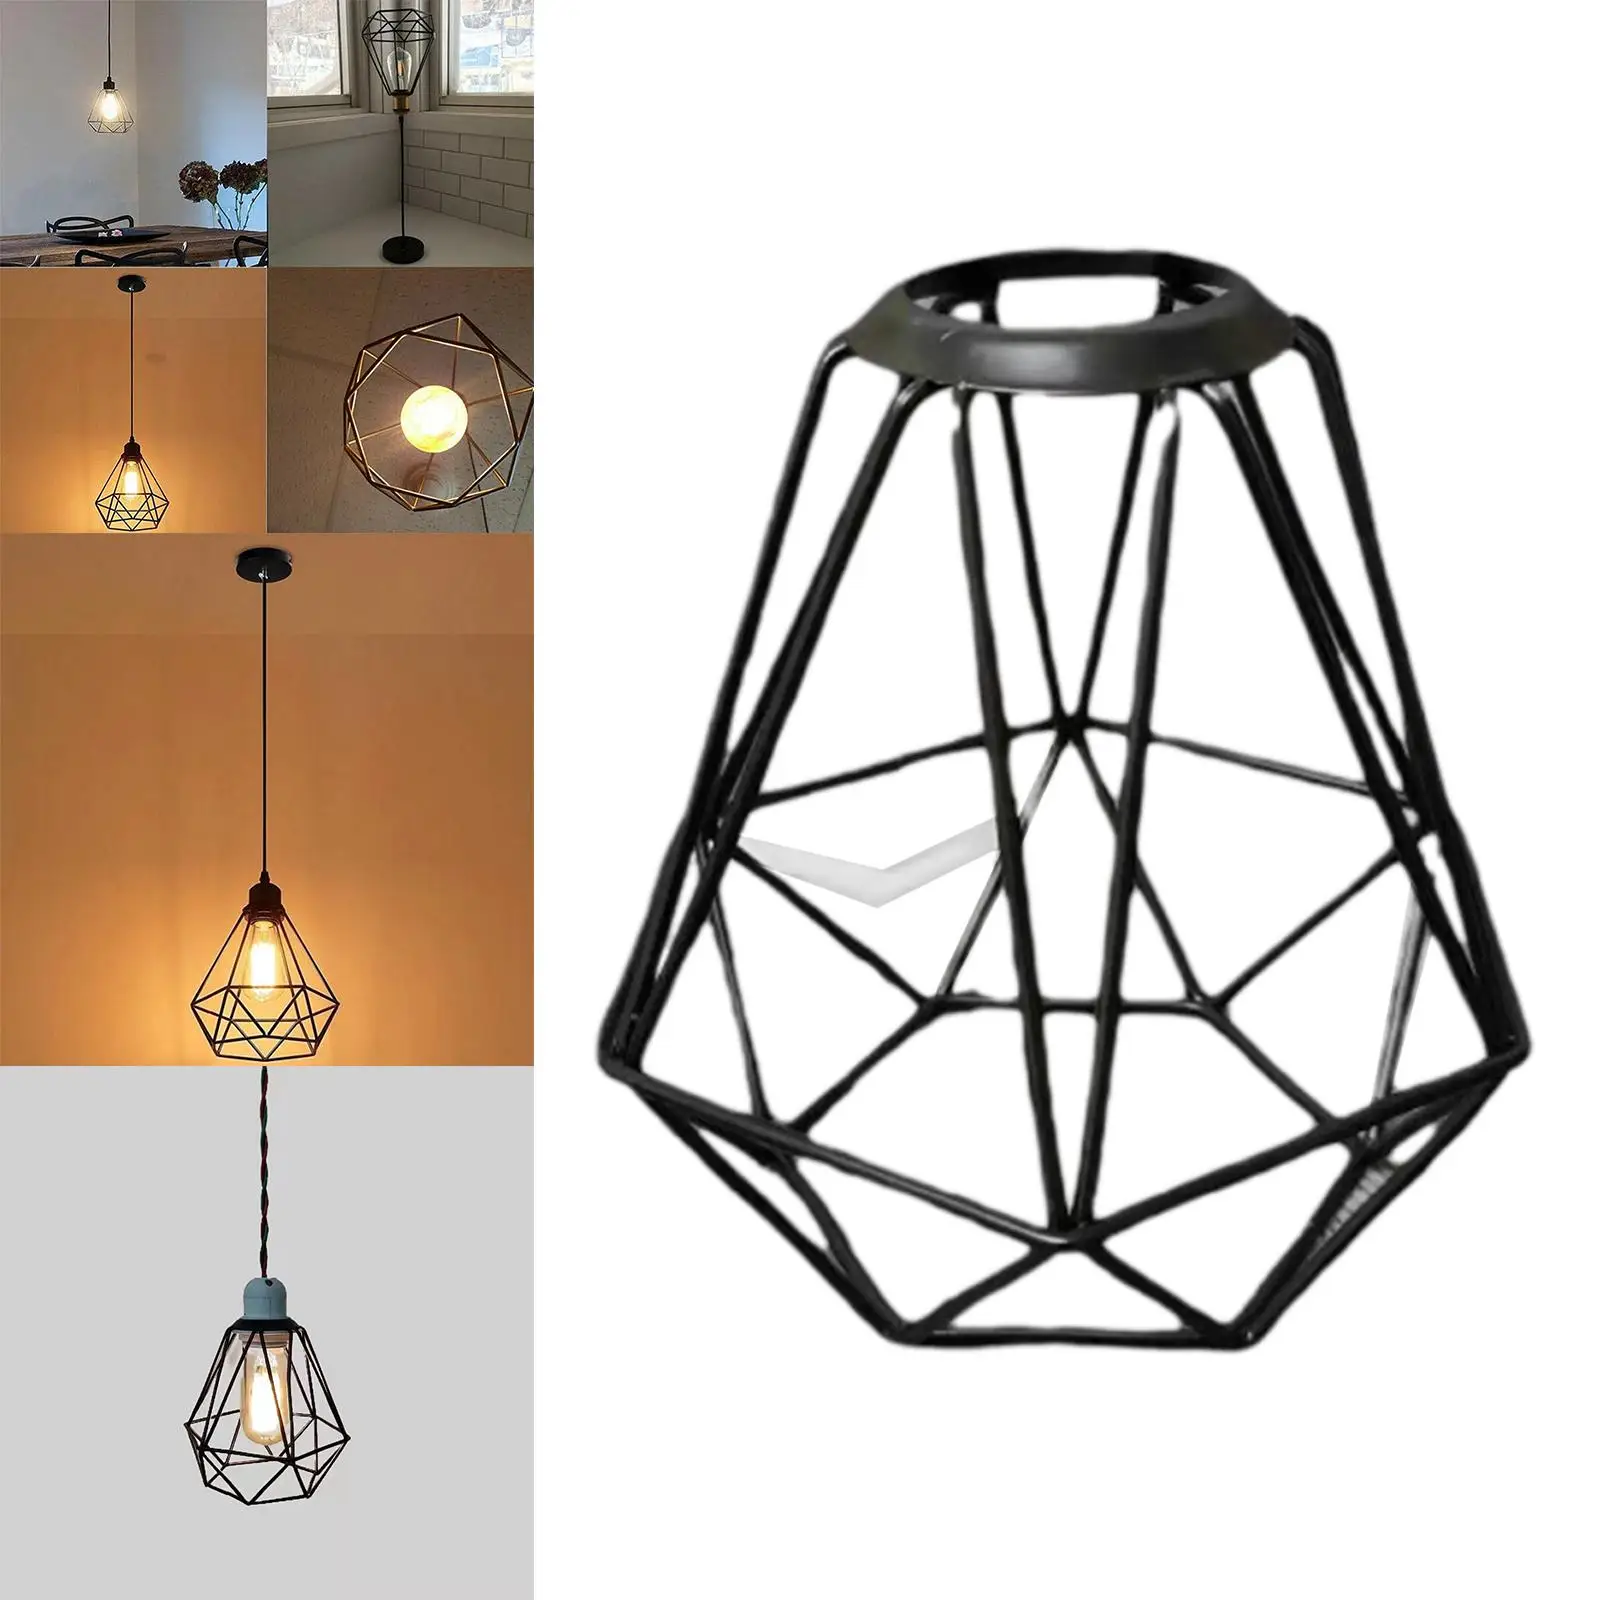 Metal Pendant Light Shades Chandelier Light Cover Protective Bulb Cage Guard for Home Bathroom Bedside Lamp Hallway Decoration